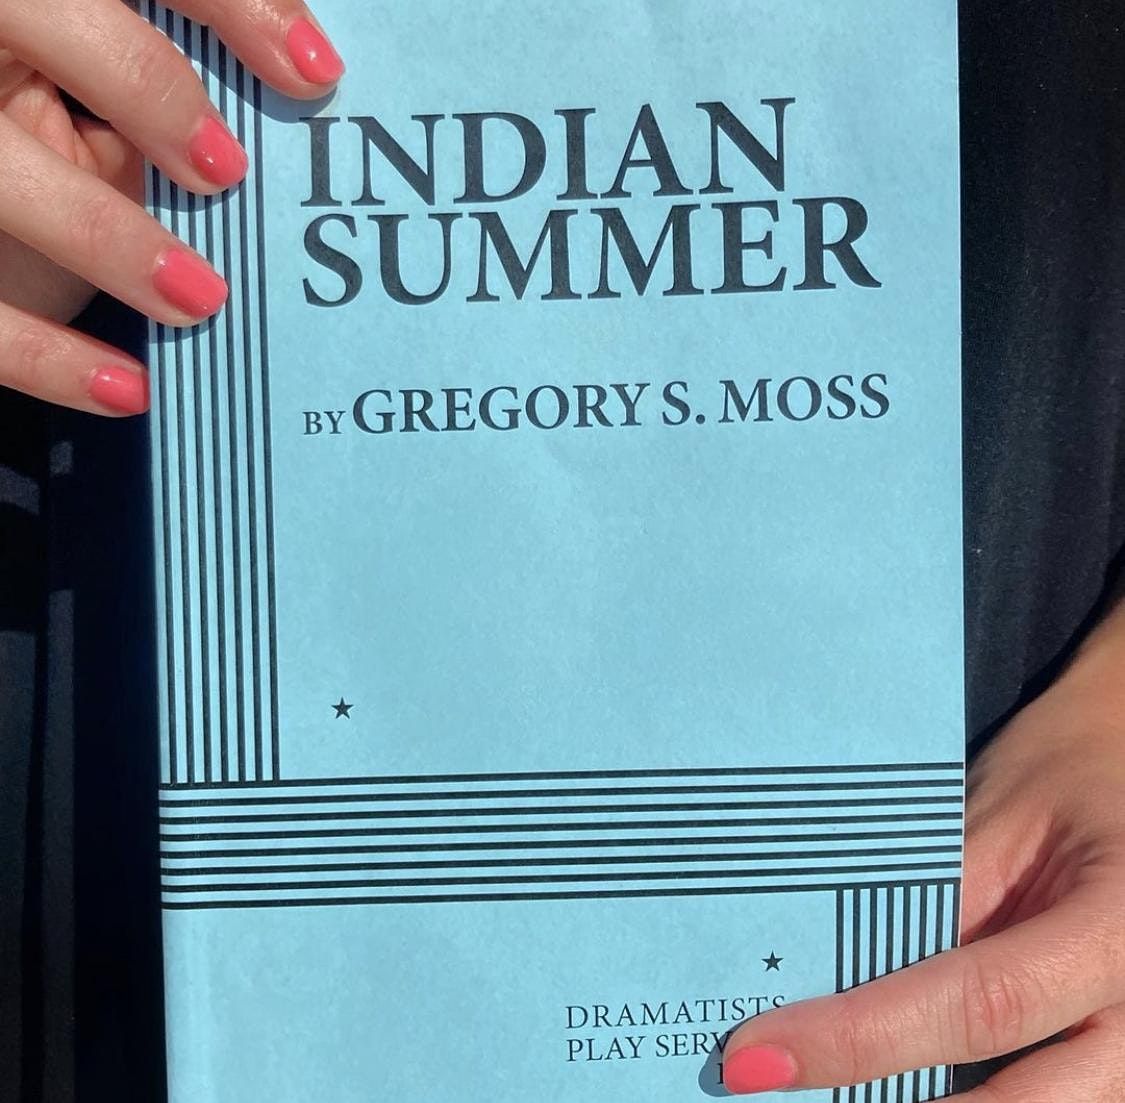 Indian Summer by Gregory S. Moss